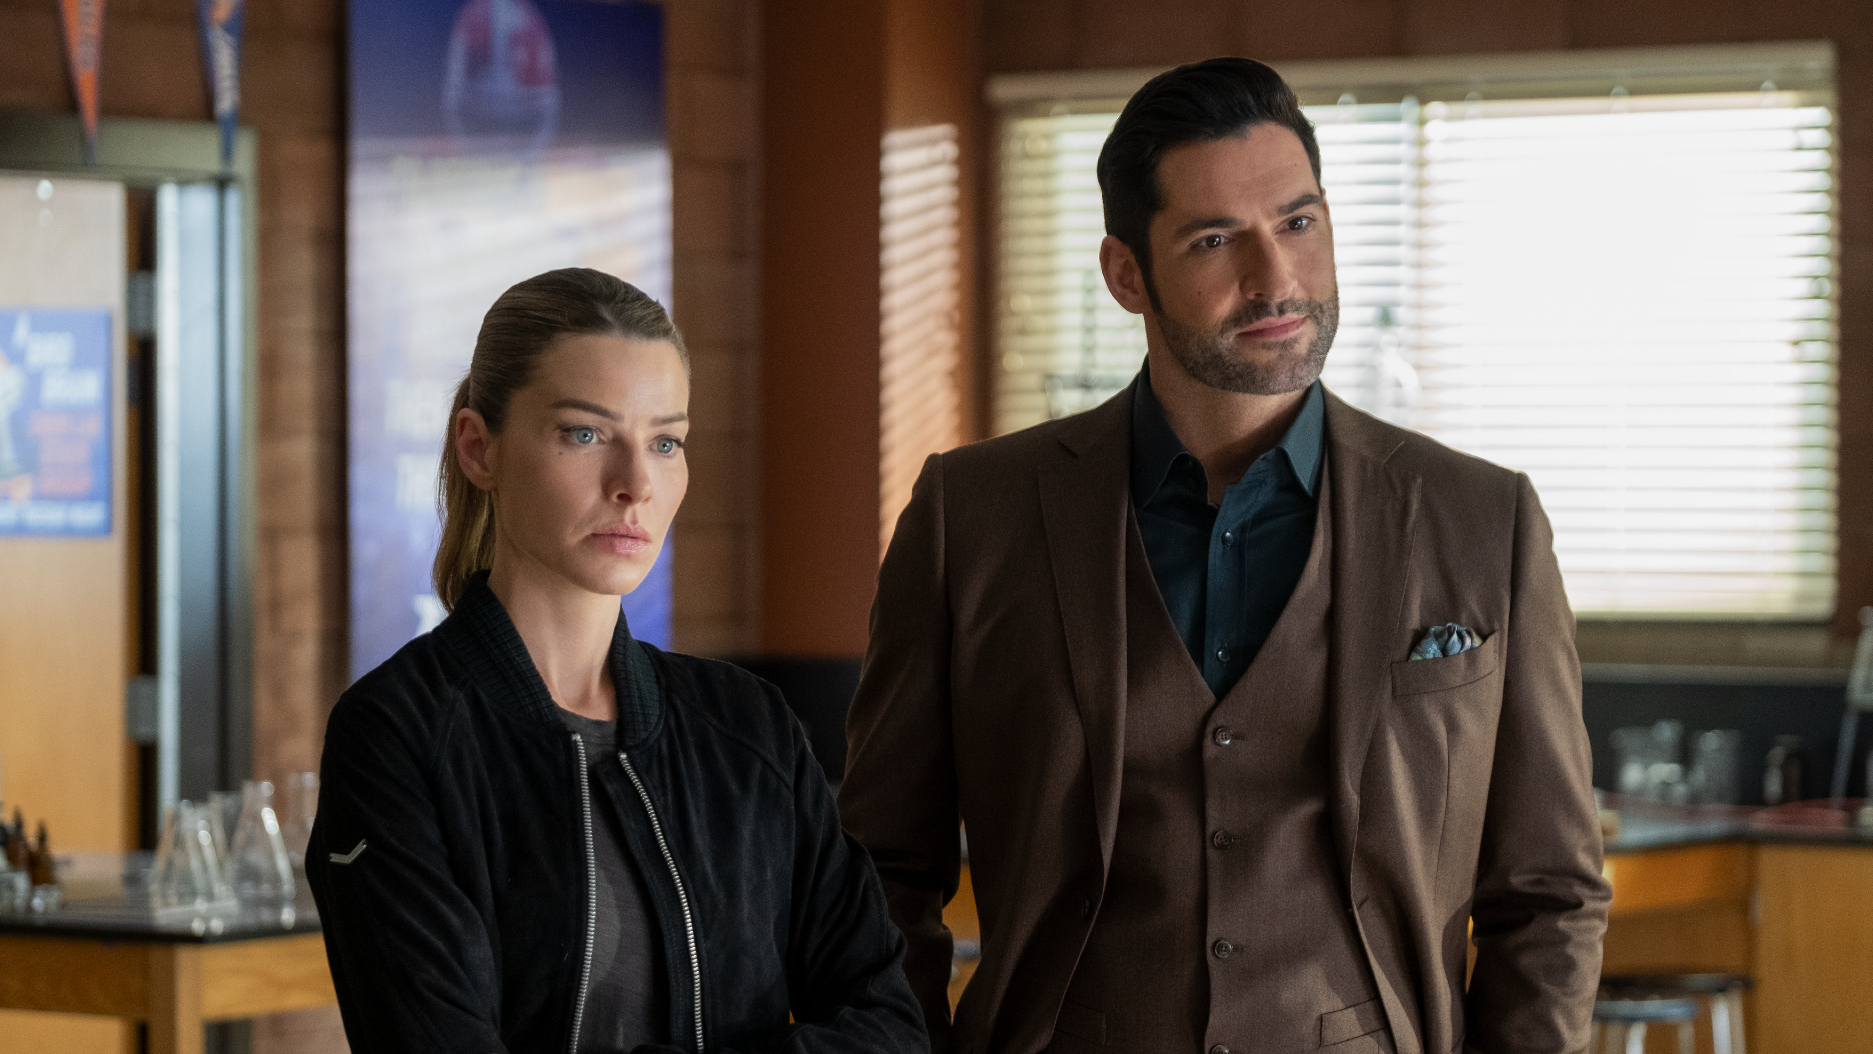 Lucifer's Tom Ellis Officially on Board for Potential Season 6 at